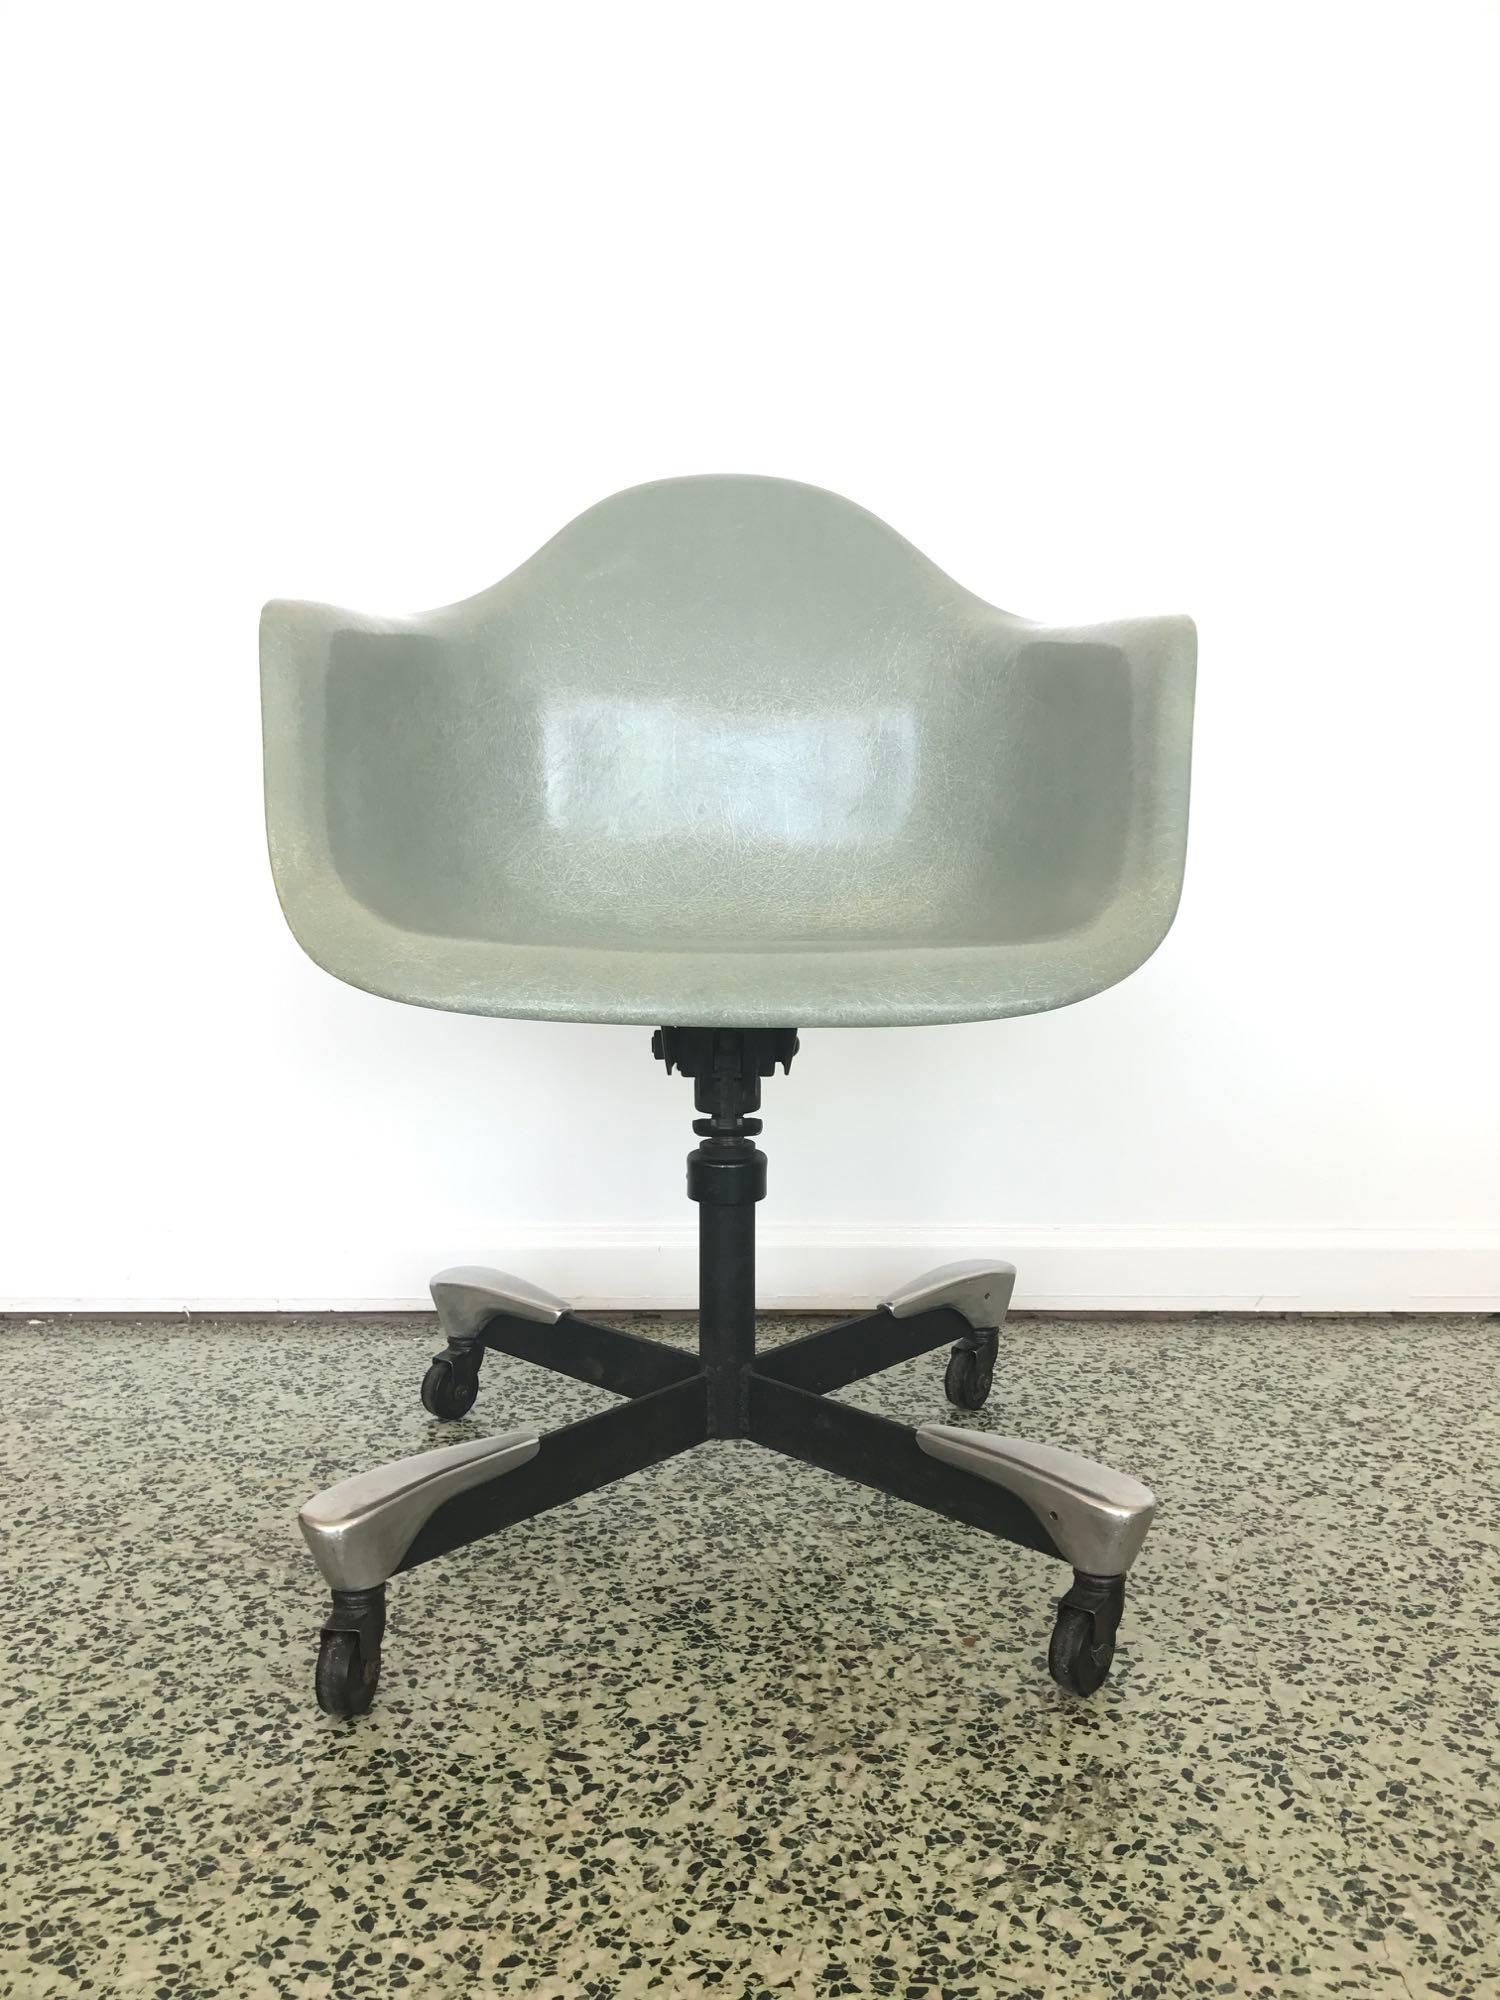 Molded fiberglass arm shell, aluminum and enameled steel base with casters. Tilt and swivel mechanism. The DAT was the first Eames chair with casters. Made by Herman Miller.